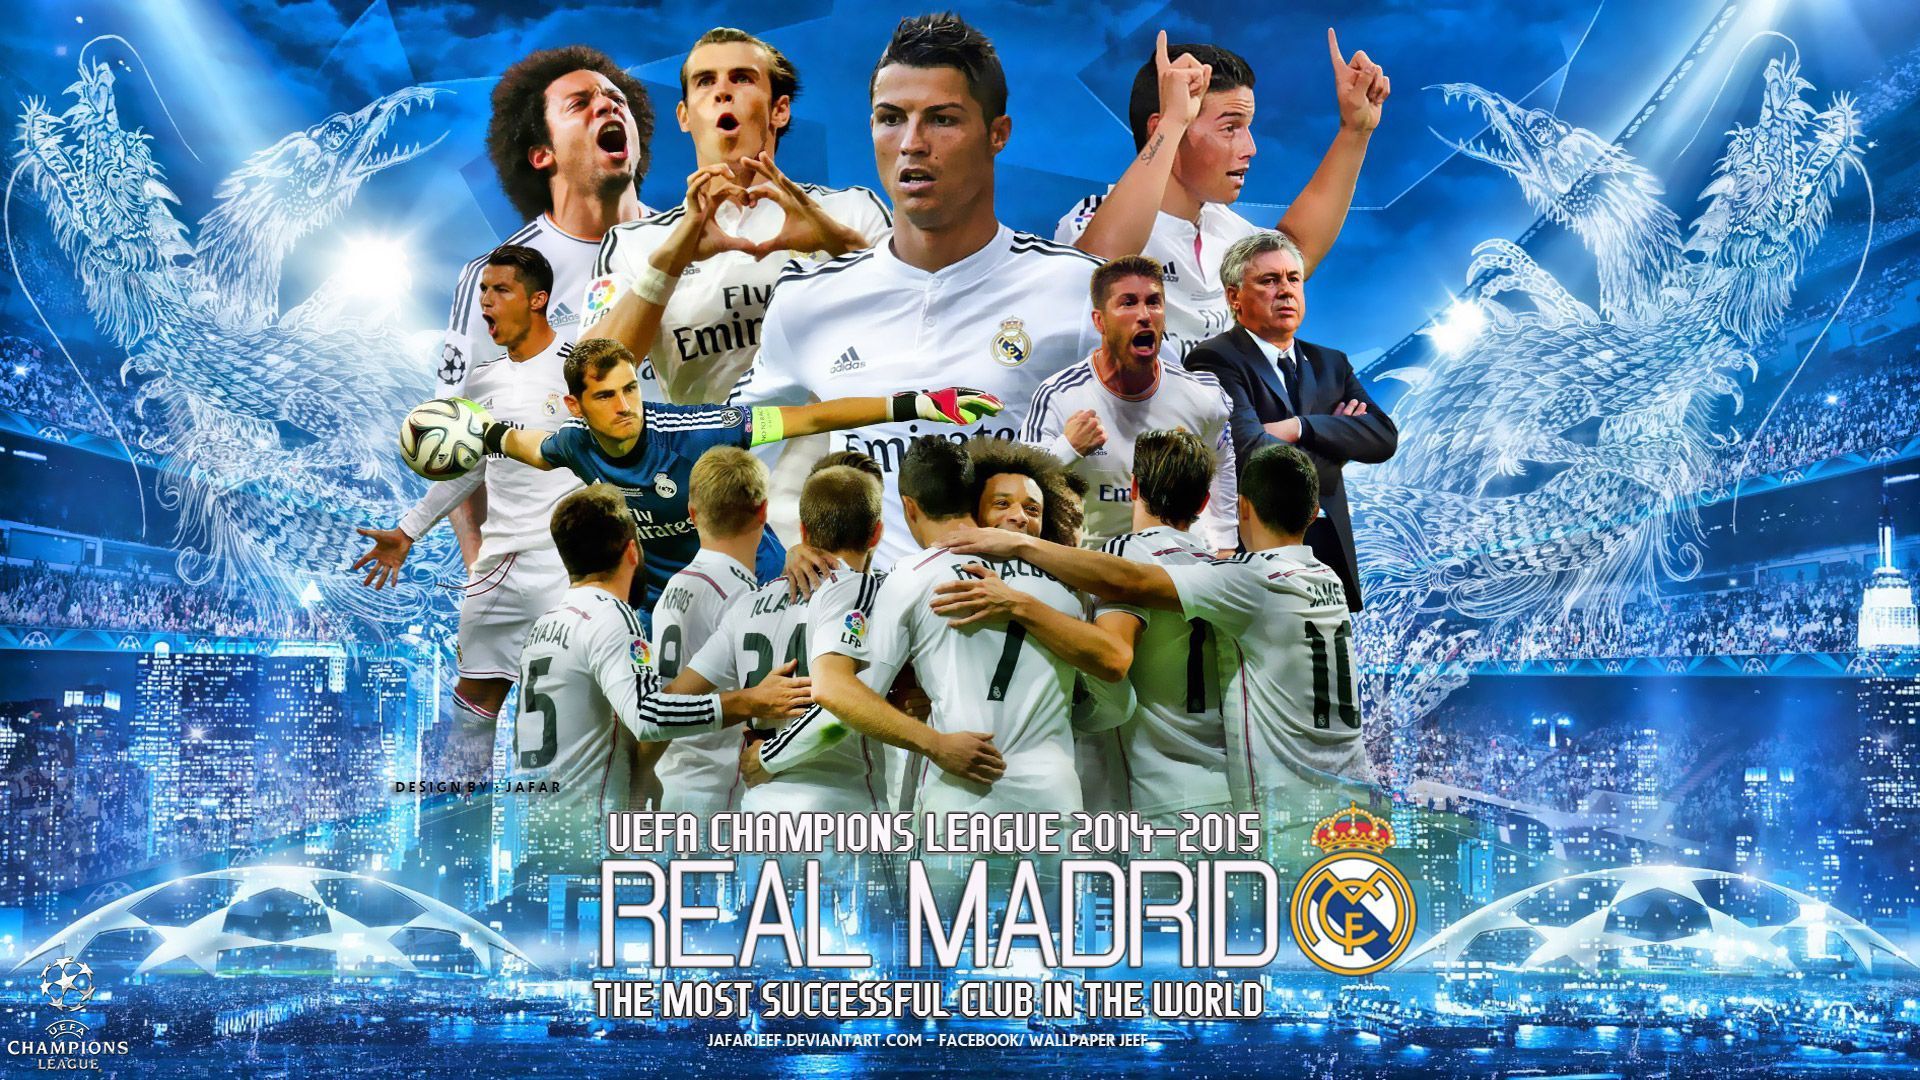 Wallpaper Real Madrid Champions League